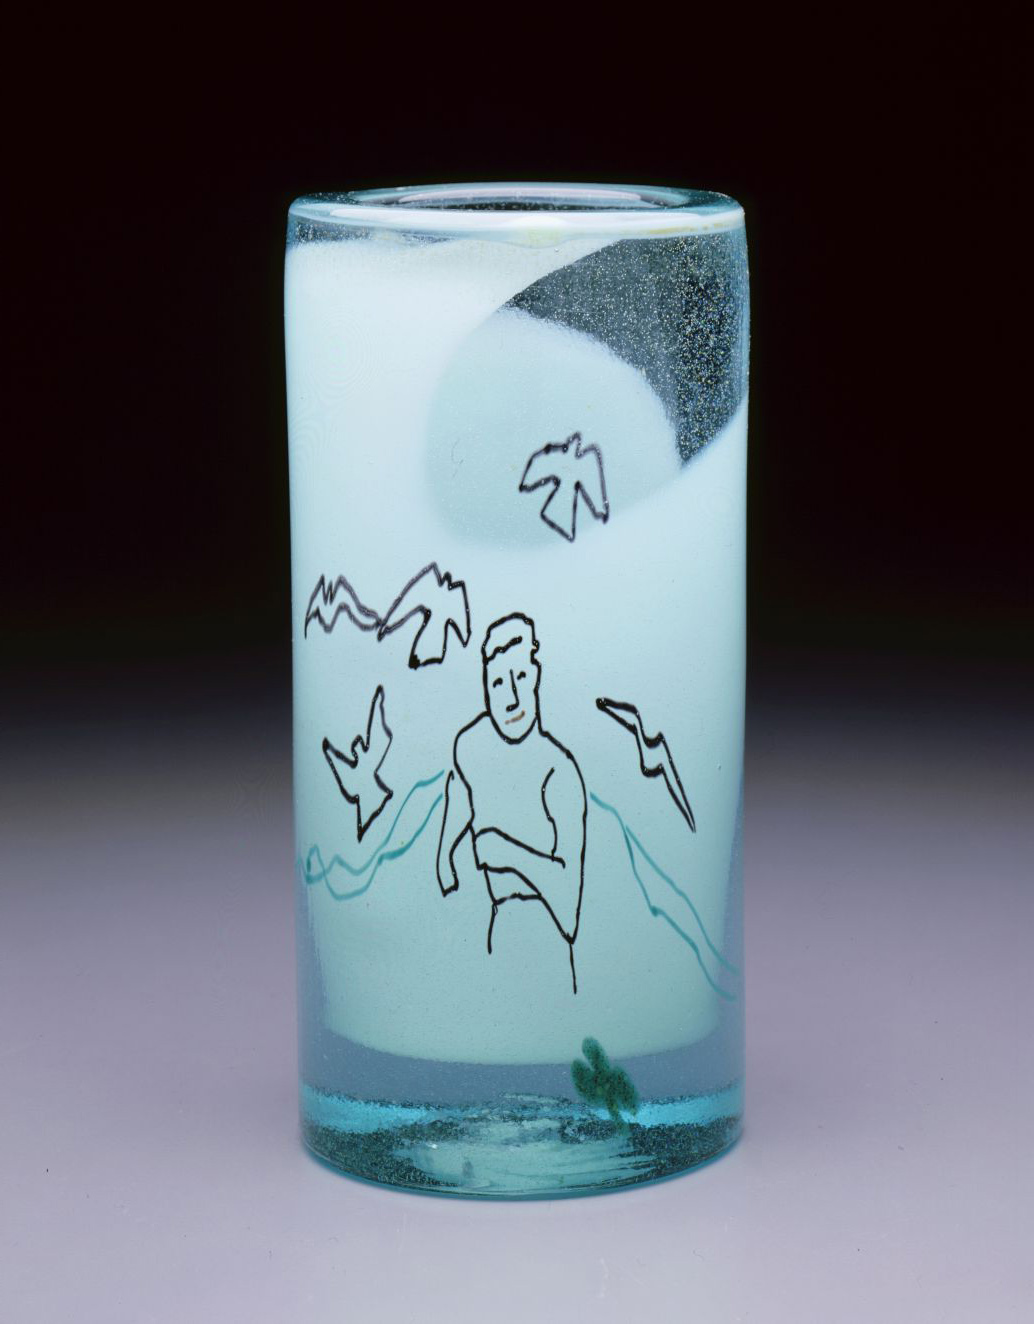  Dale Chihuly,&nbsp; Irish Cylinder #18 &nbsp;&nbsp;(1975, glass, 10 x 5 inches), DC.280 